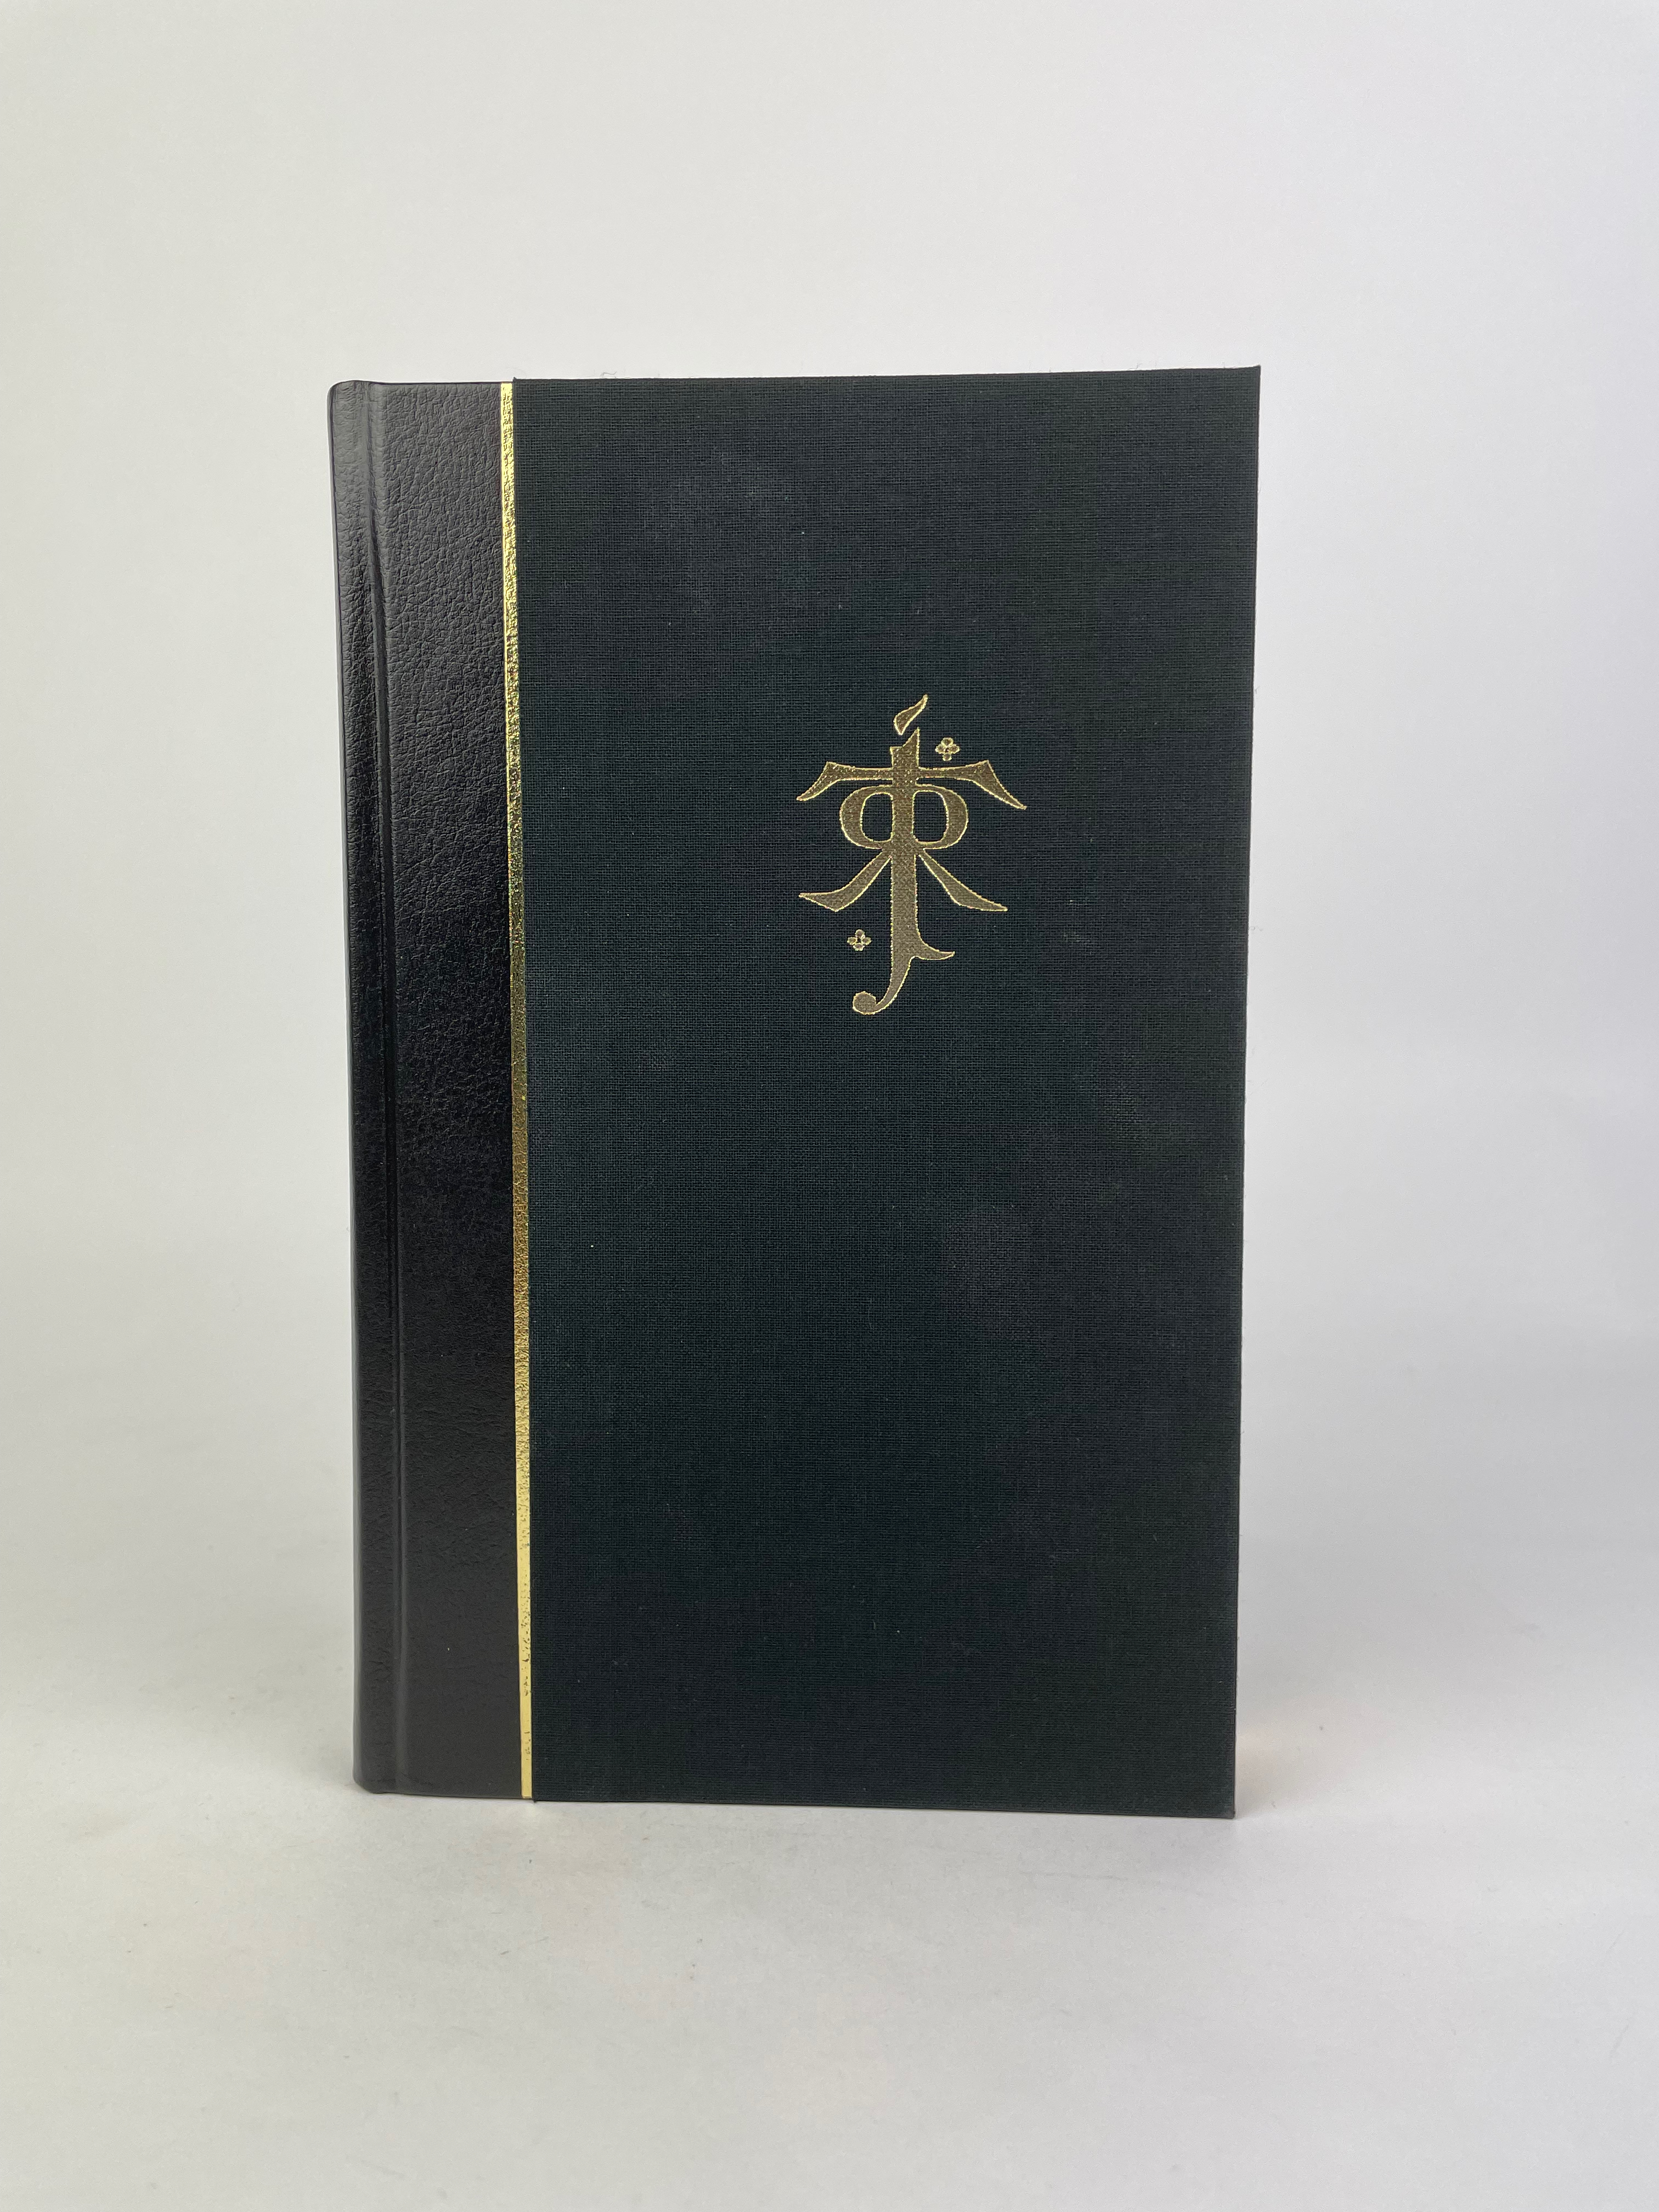 Lord of the Rings, Harper Collins Deluxe Limited Edition of 2002 - Black Leather 6